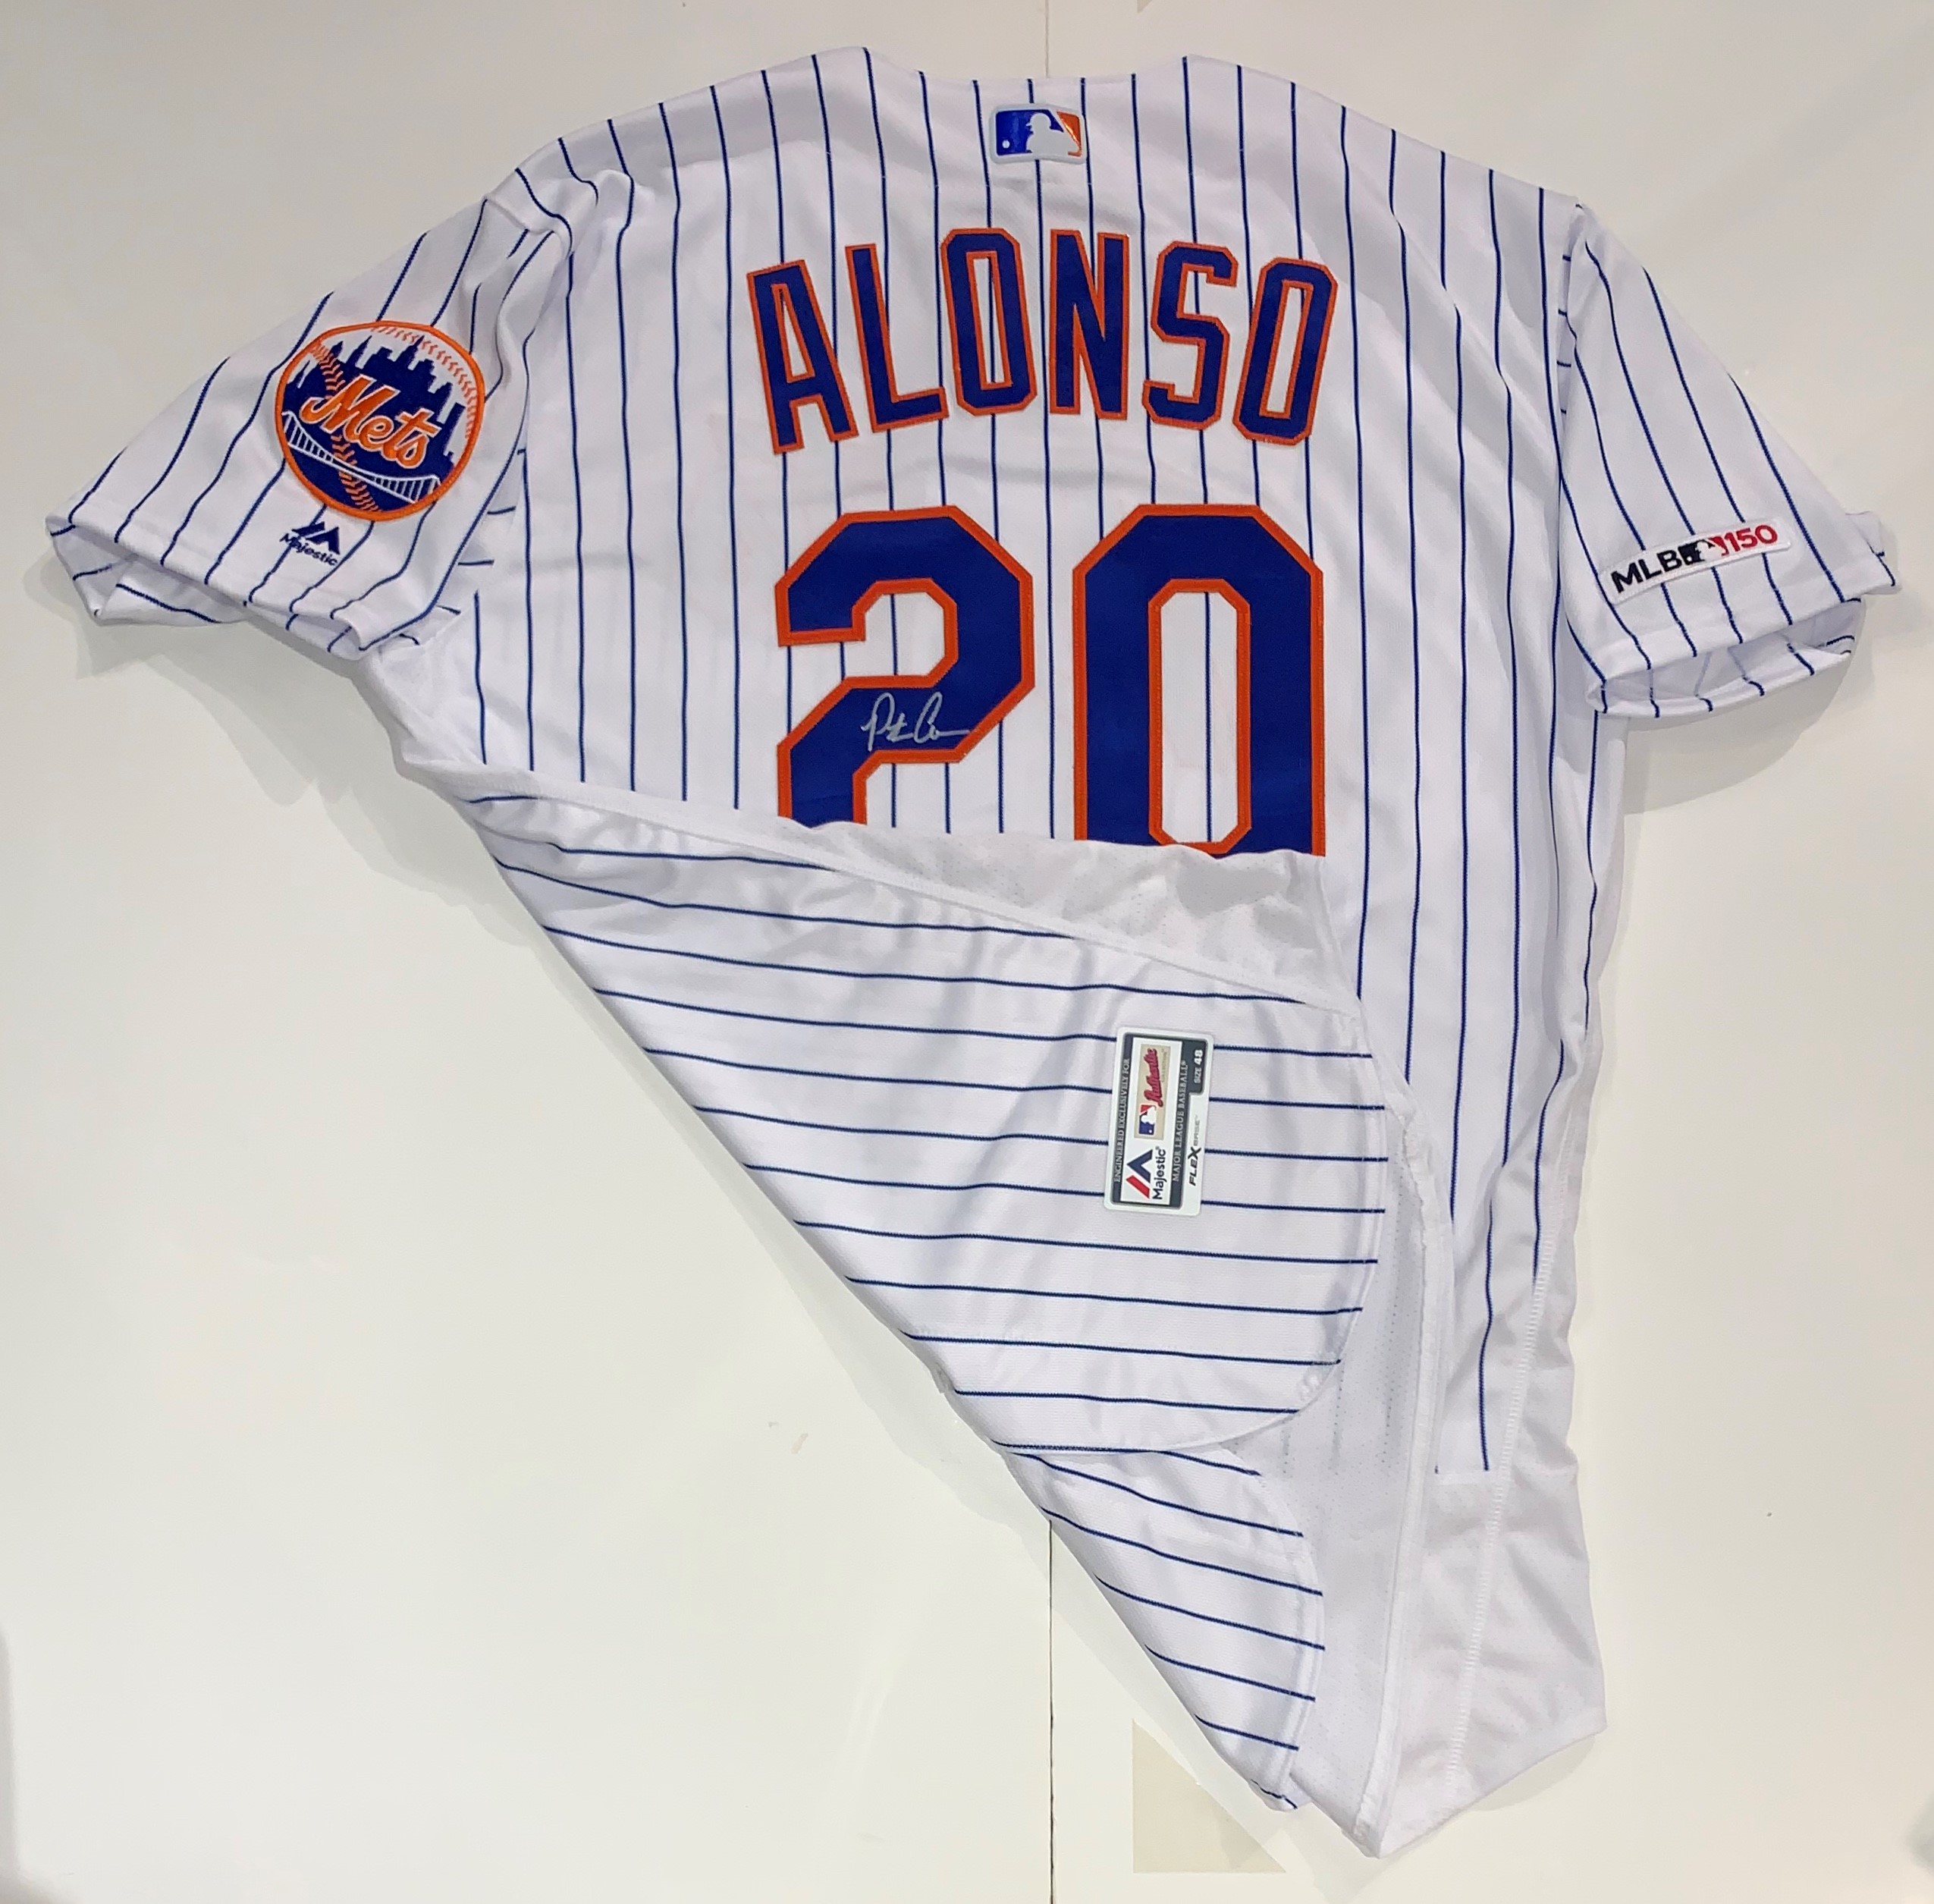 Pete Alonso New York Mets Autographed Nike #20 Jersey - Limited Edition #1/1